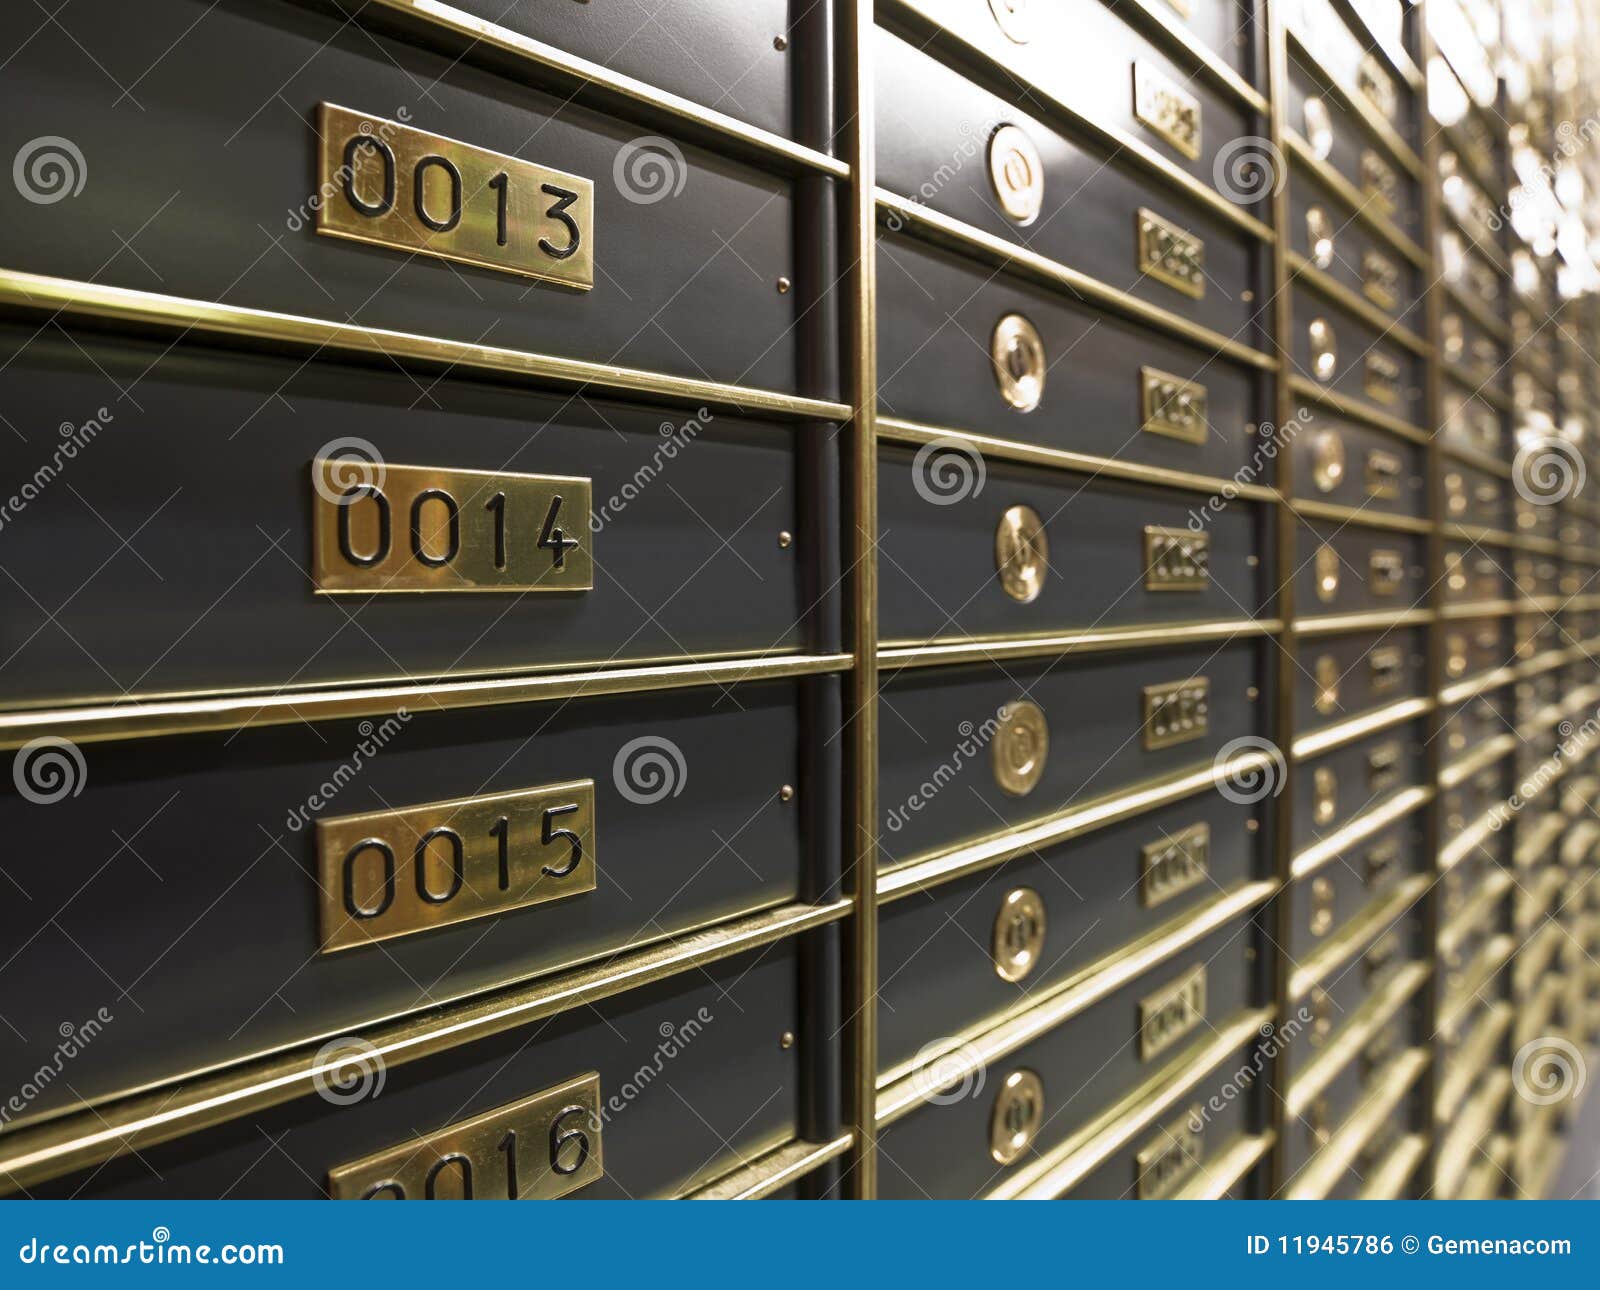 rows of luxurious safe deposit boxes